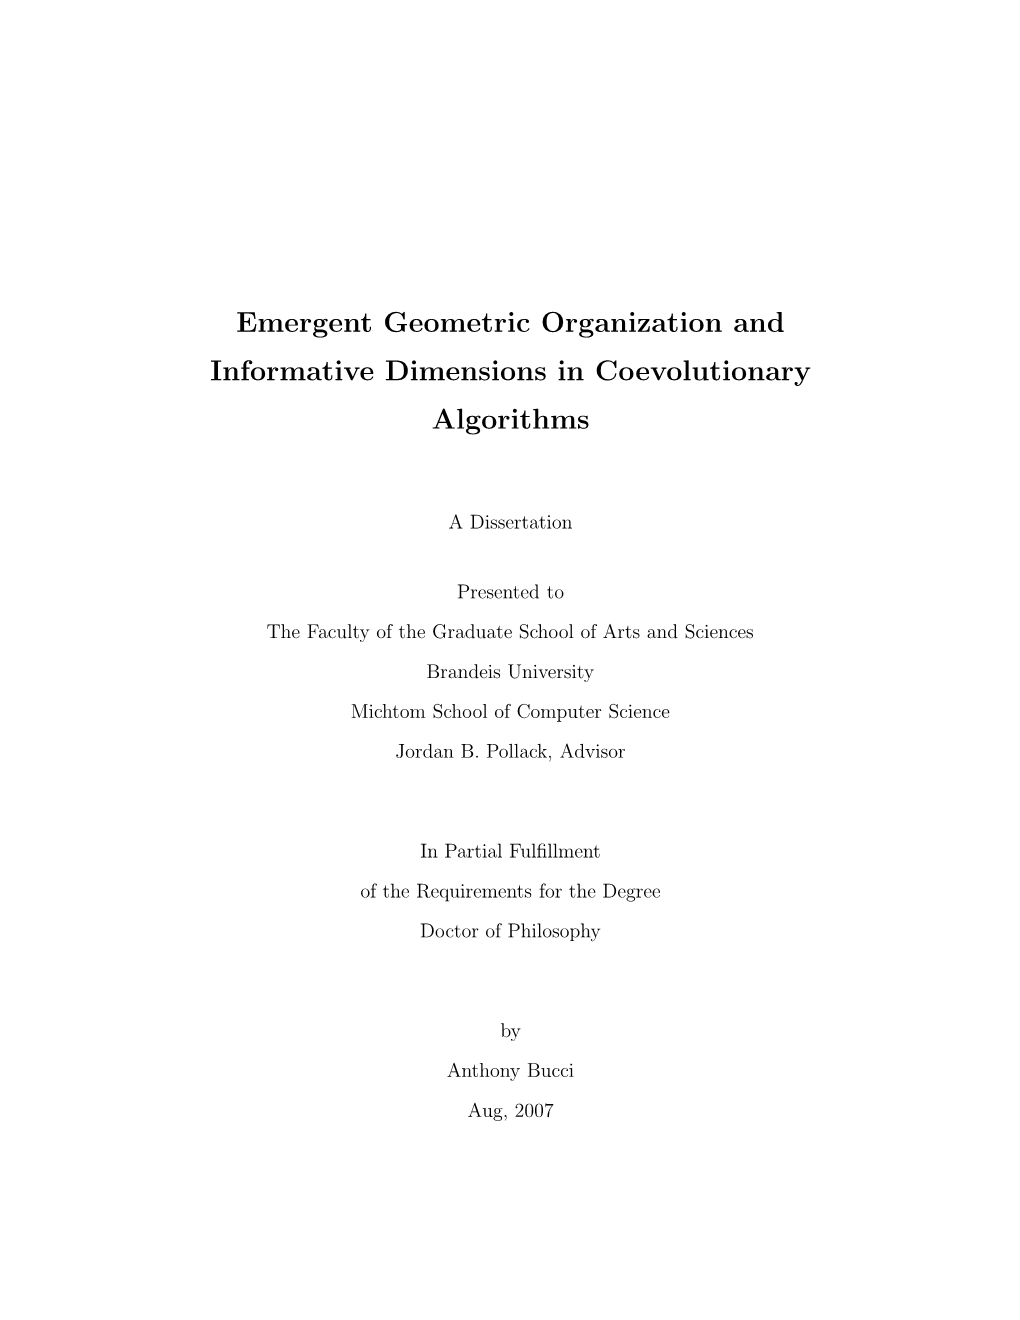 Emergent Geometric Organization and Informative Dimensions in Coevolutionary Algorithms